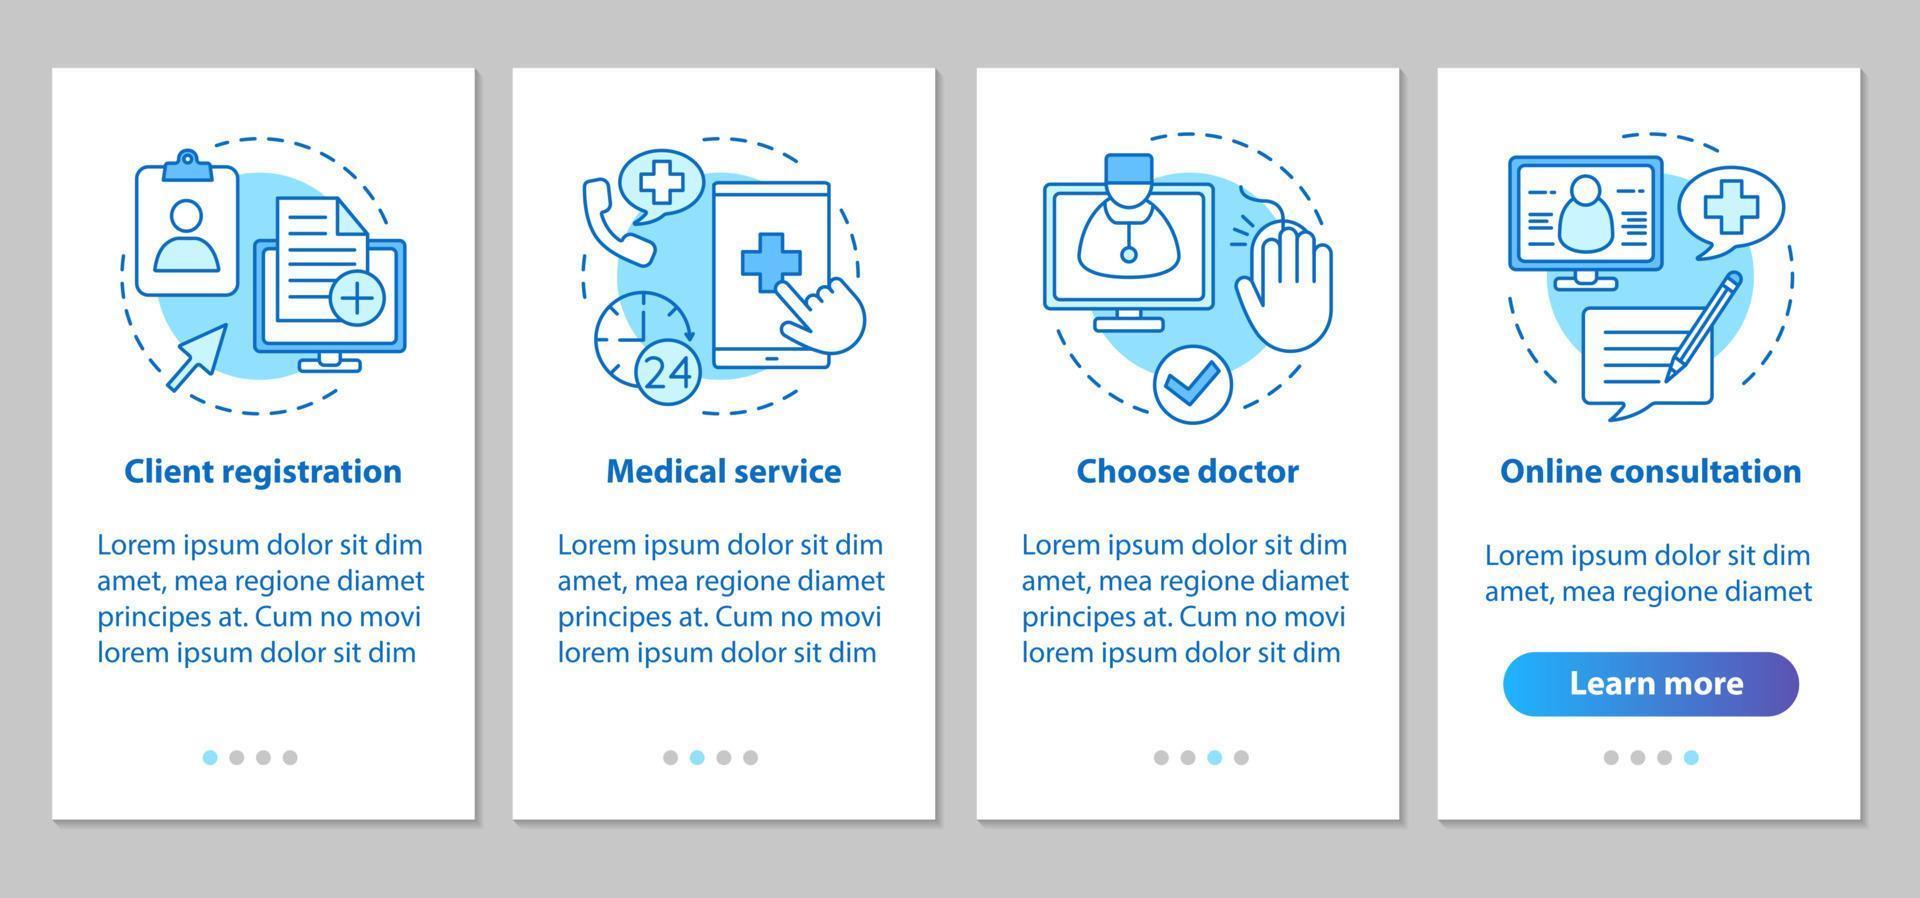 Medical service onboarding mobile app page screen with linear concepts. Doctor online consultations steps graphic instructions. Medical appointment. UX, UI, GUI vector template with illustrations